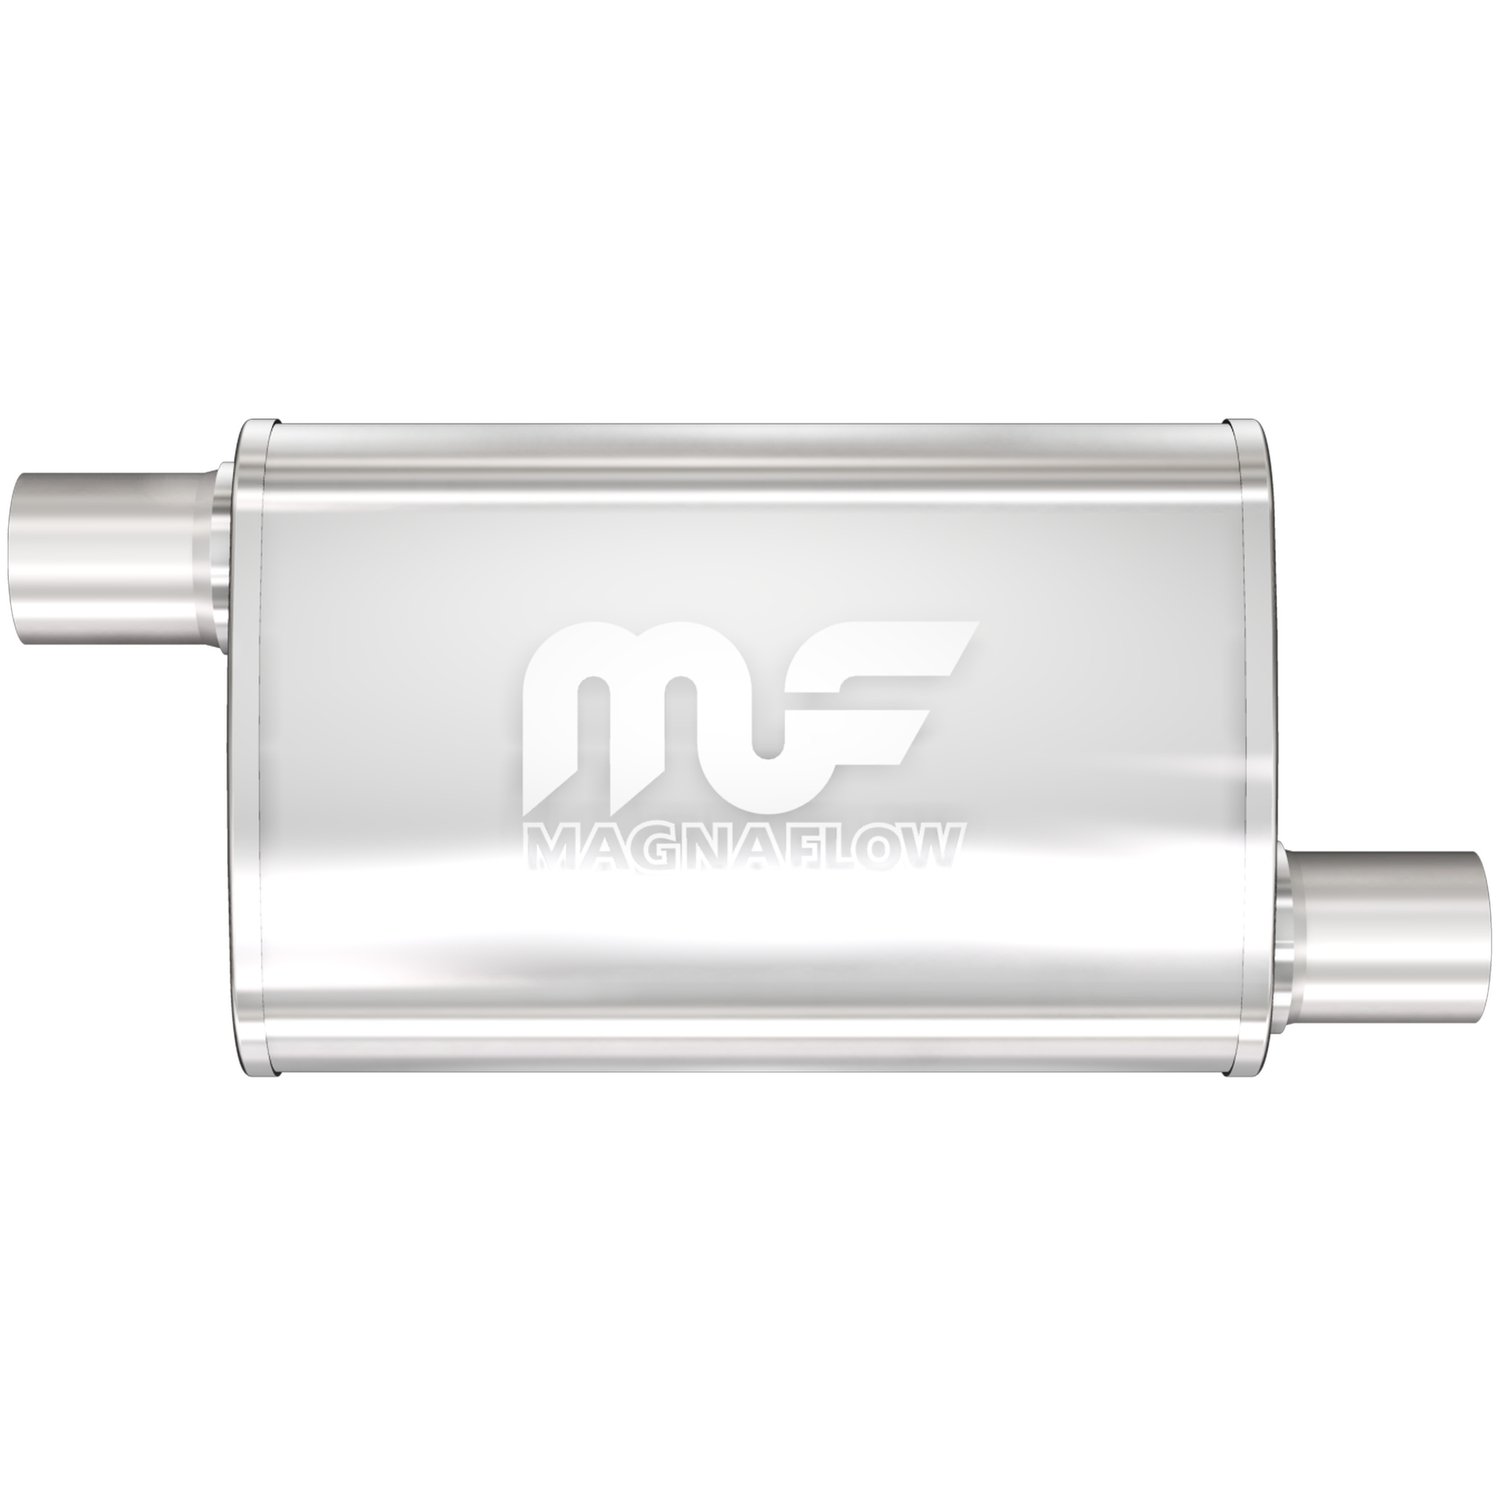 4" x 9" Oval Muffler Offset In/Offset Out: 2"/2" Body Length: 18" Overall Length: 24" Core Size: 2.5" Satin Finish